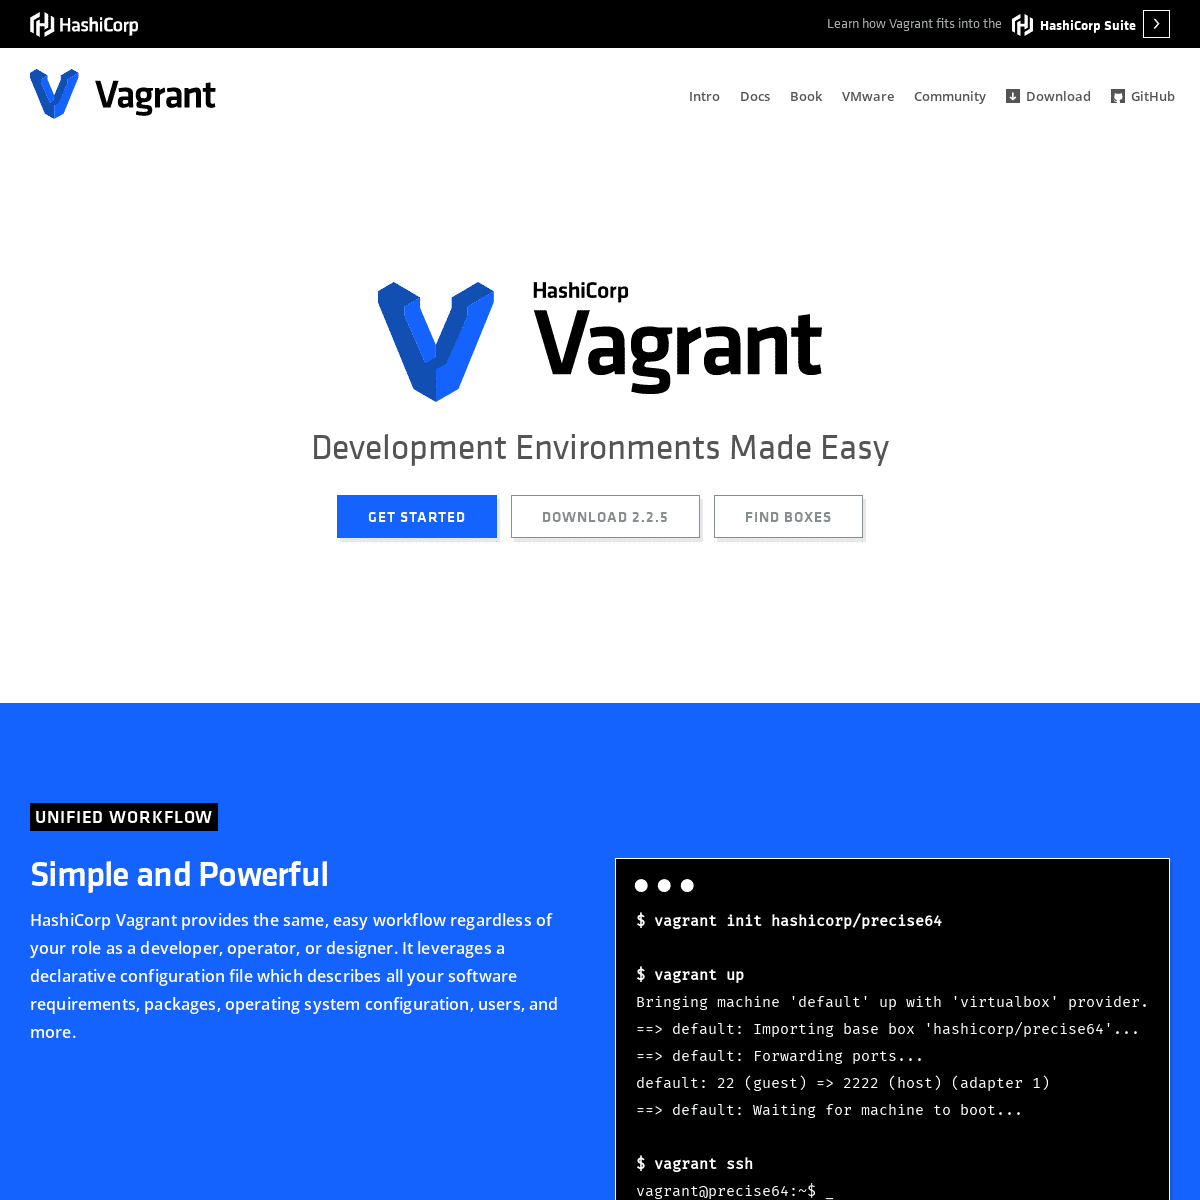 Vagrant by HashiCorp